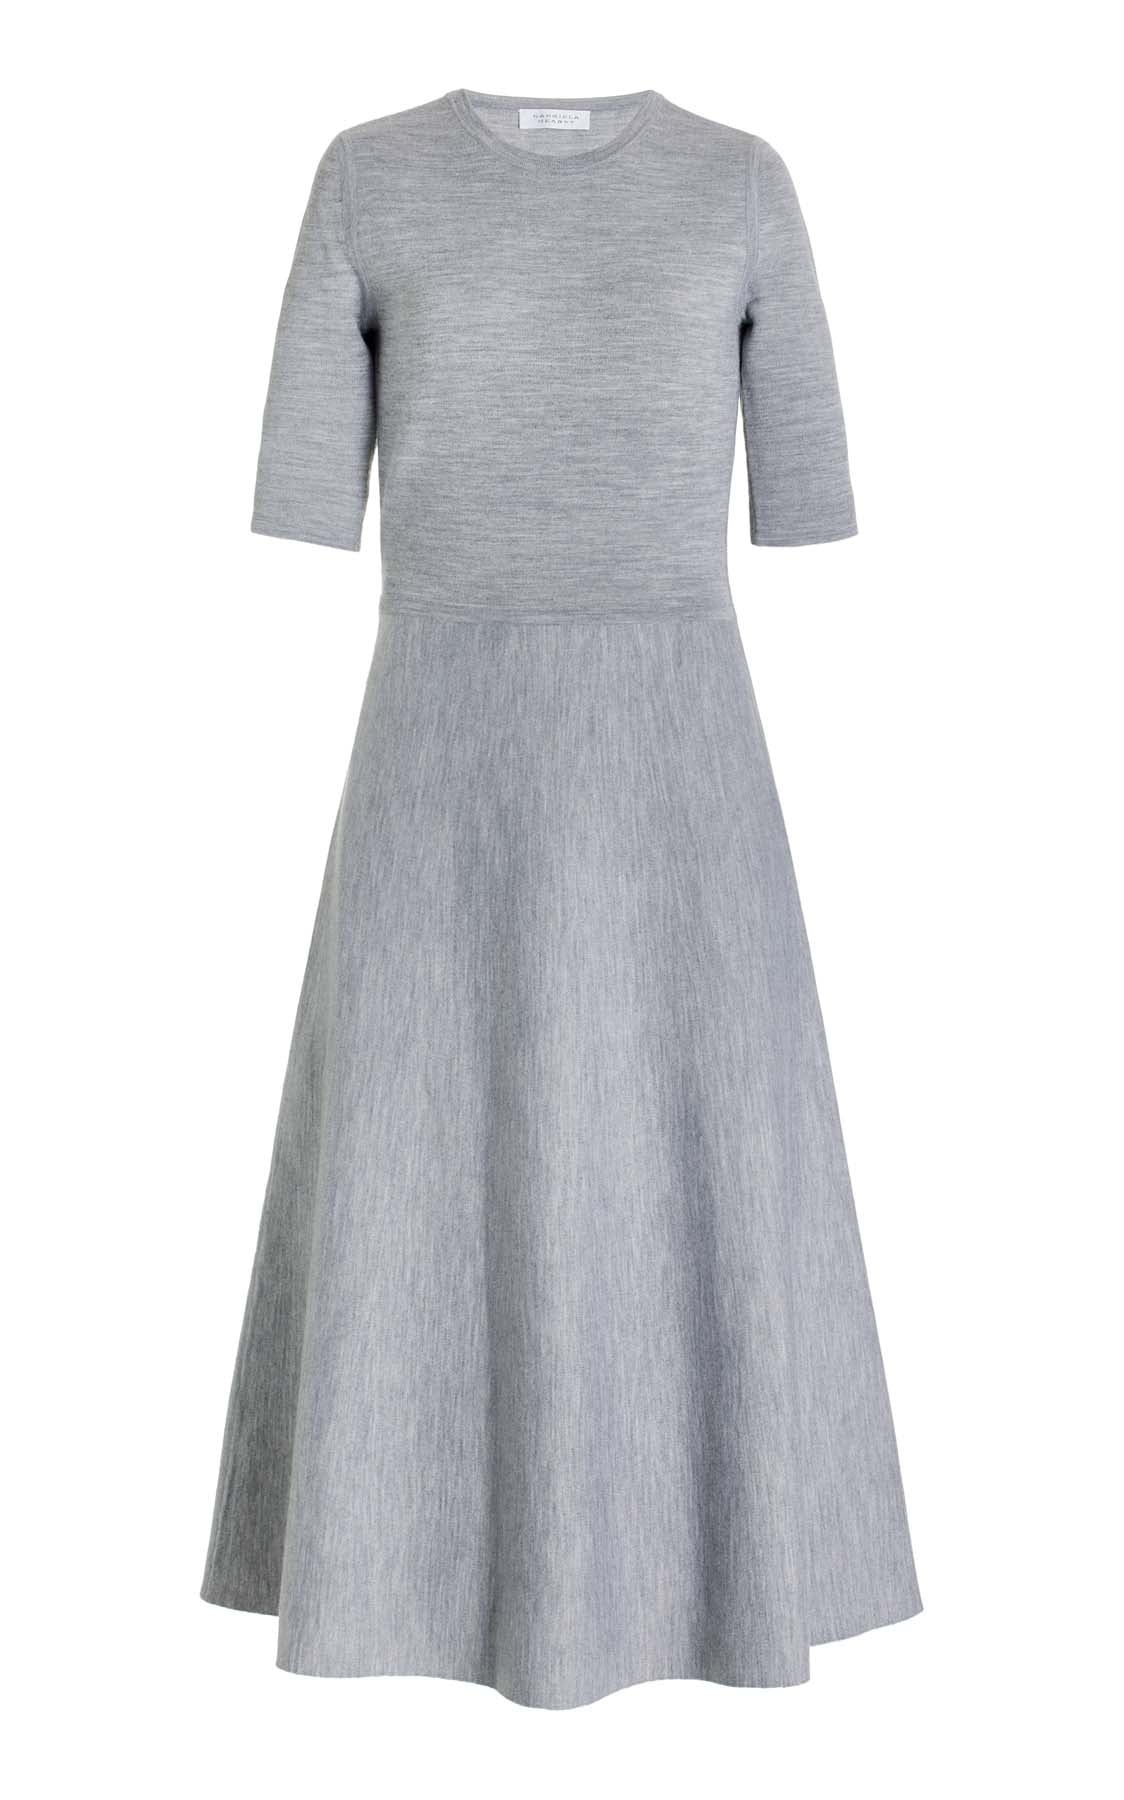 Seymore Knit Dress in Grey Cashmere Wool with Silk - 1